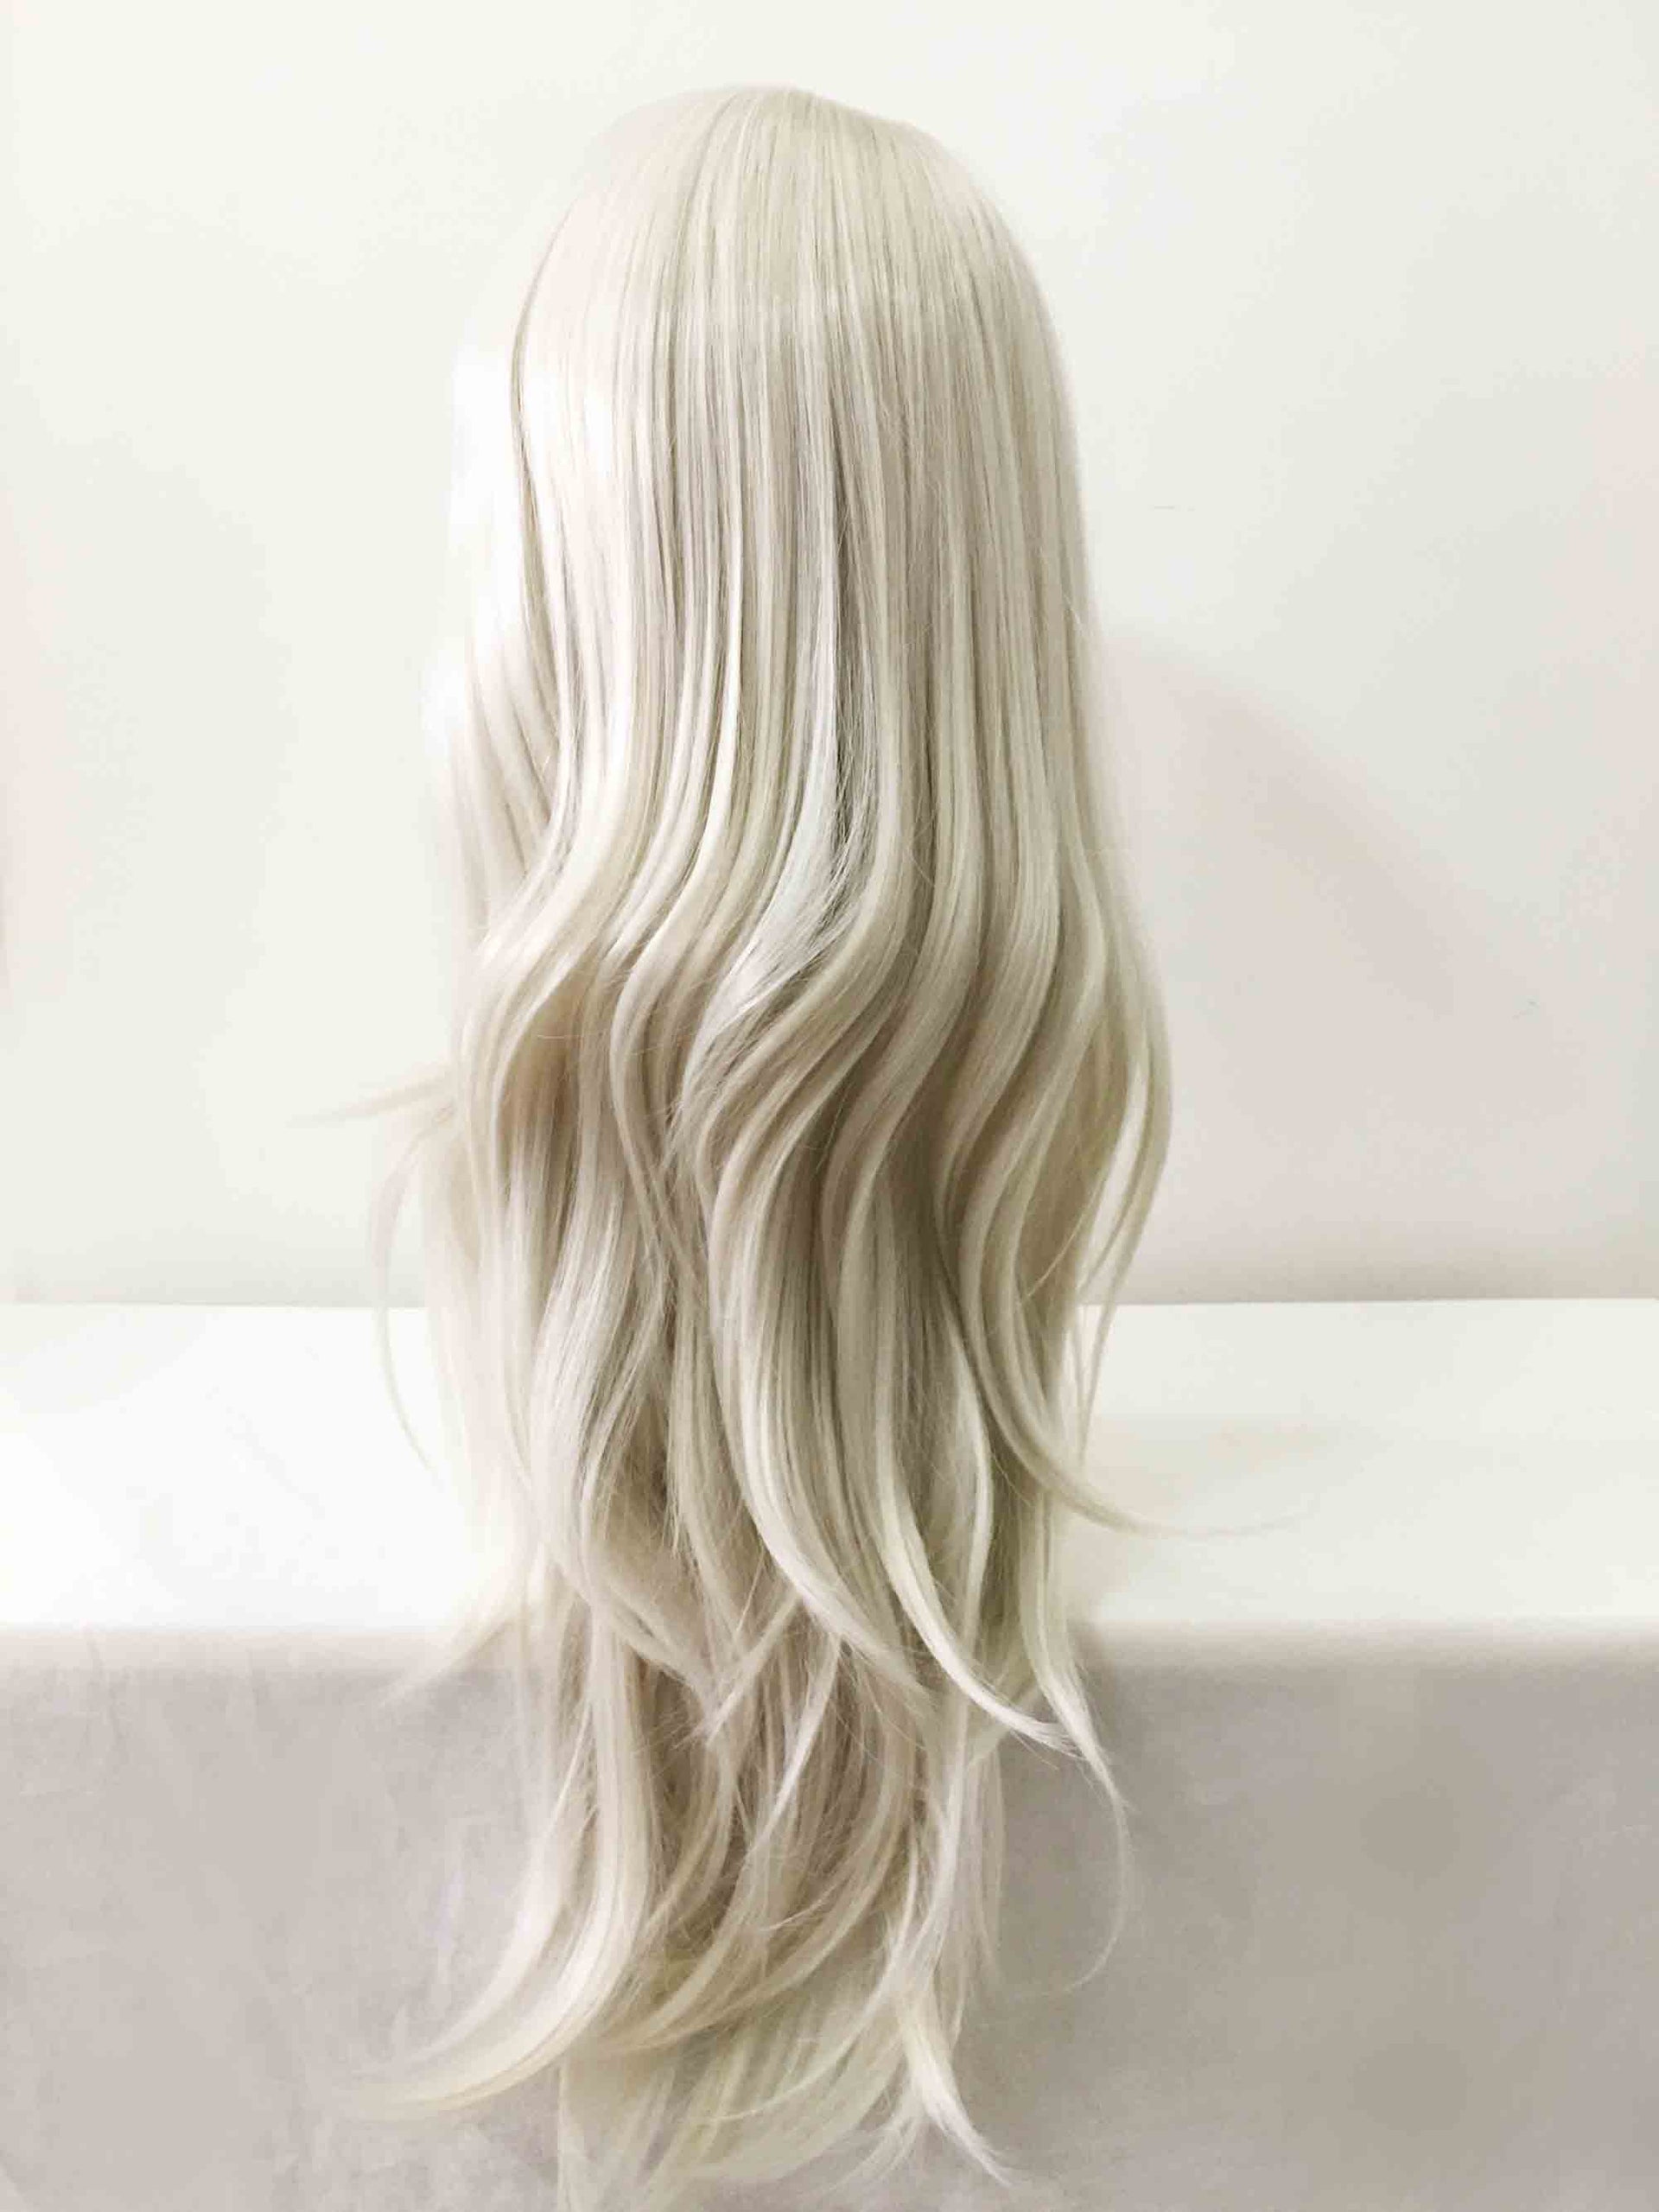 nevermindyrhead Men White Long Straight Long Bangs Middle Part Cosplay Wig